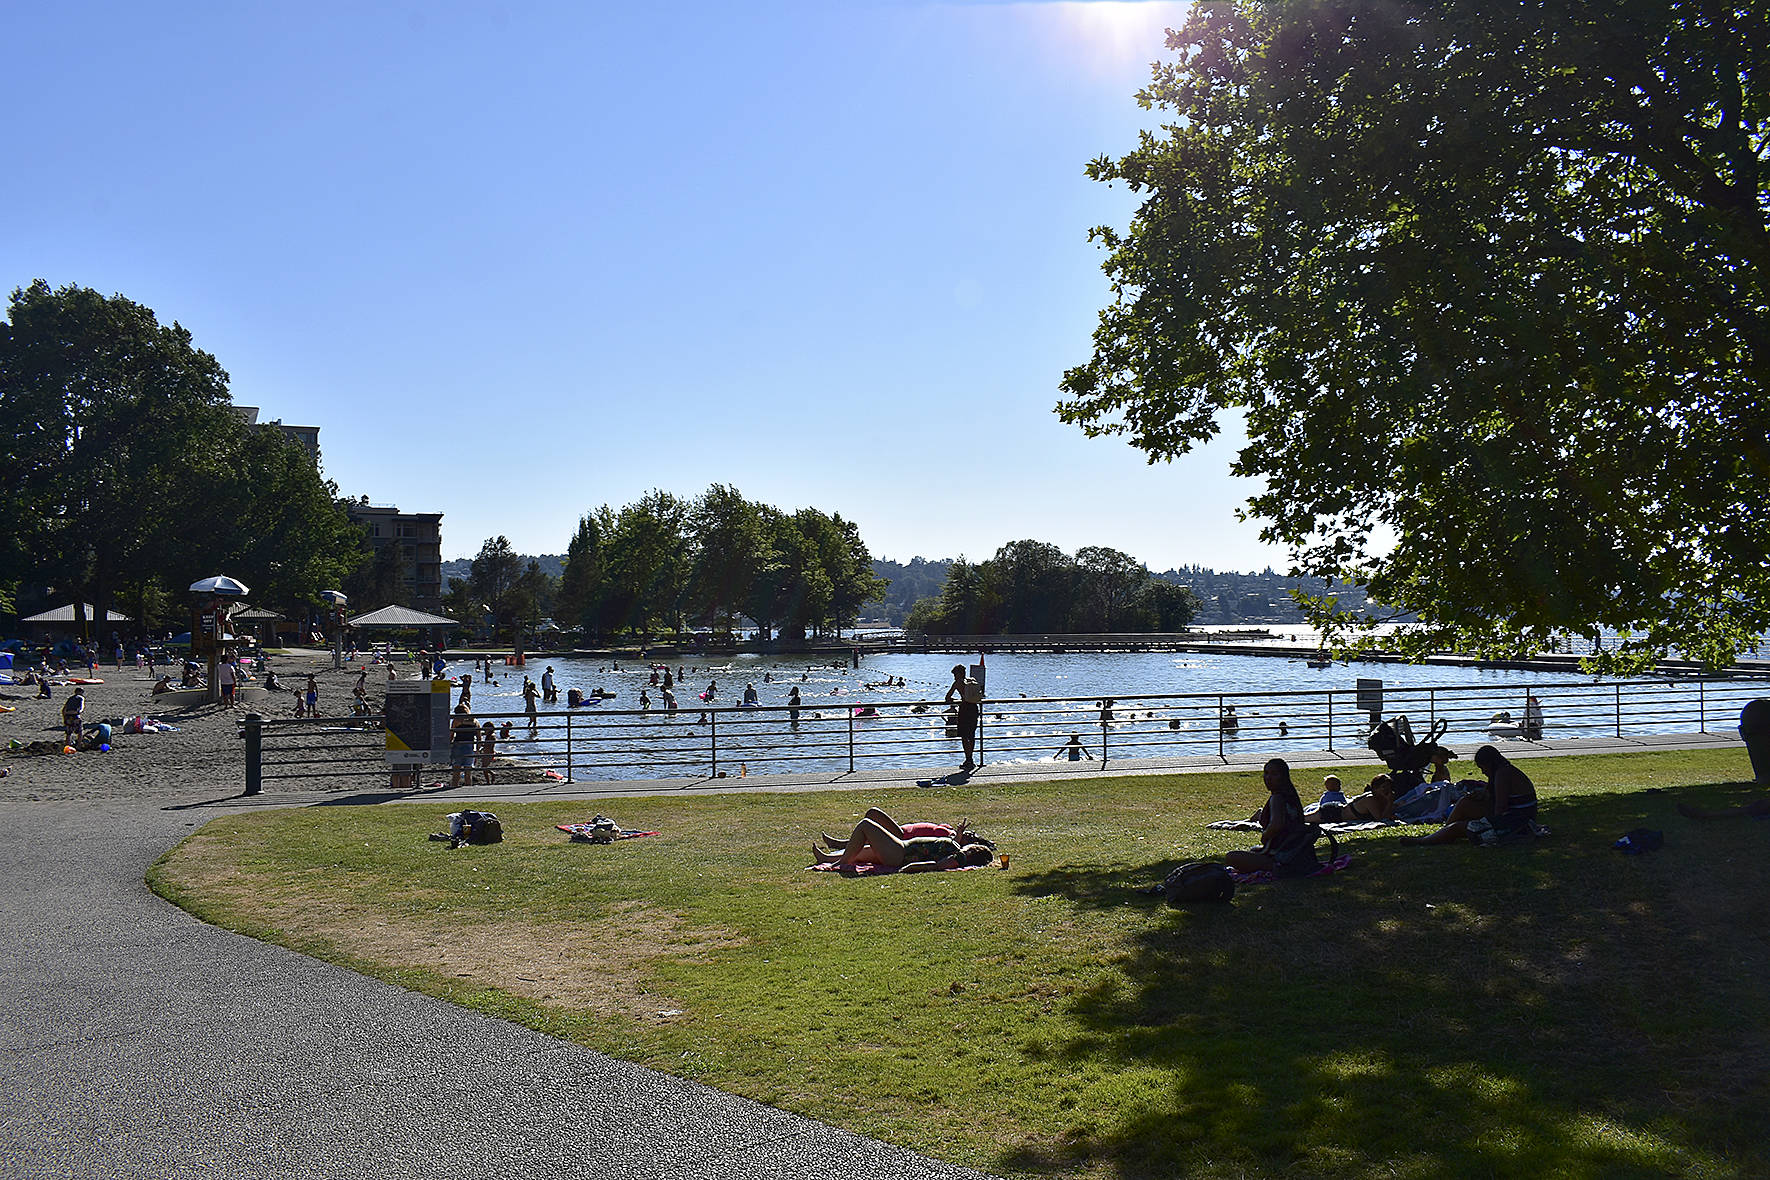 City of Renton offers ideas to stay safe and beat the heat